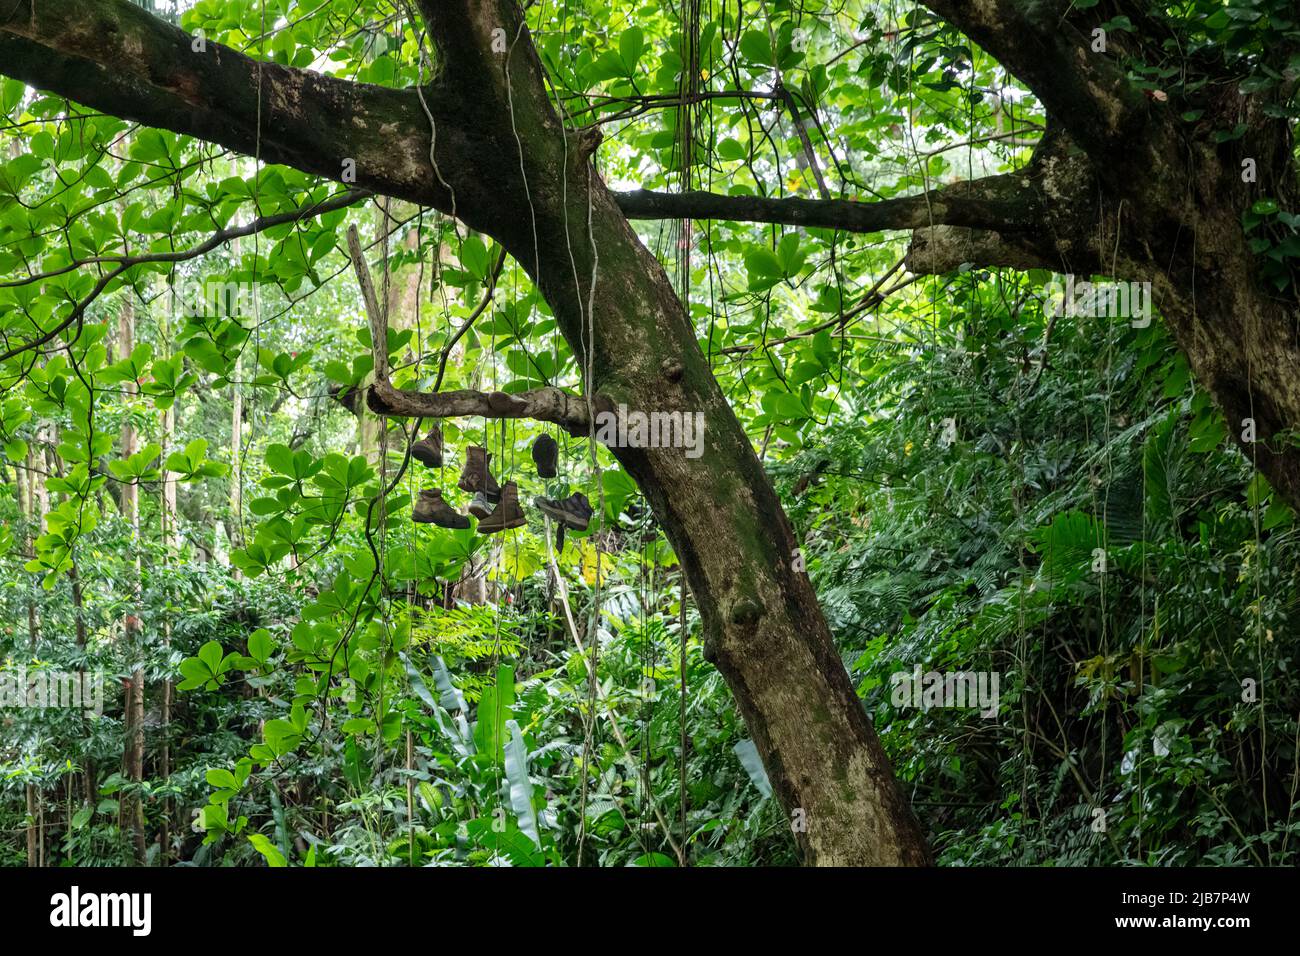 shoes hanging from a tree branch along the Manoa Falls Trail, Oahu, Hawaii Stock Photo